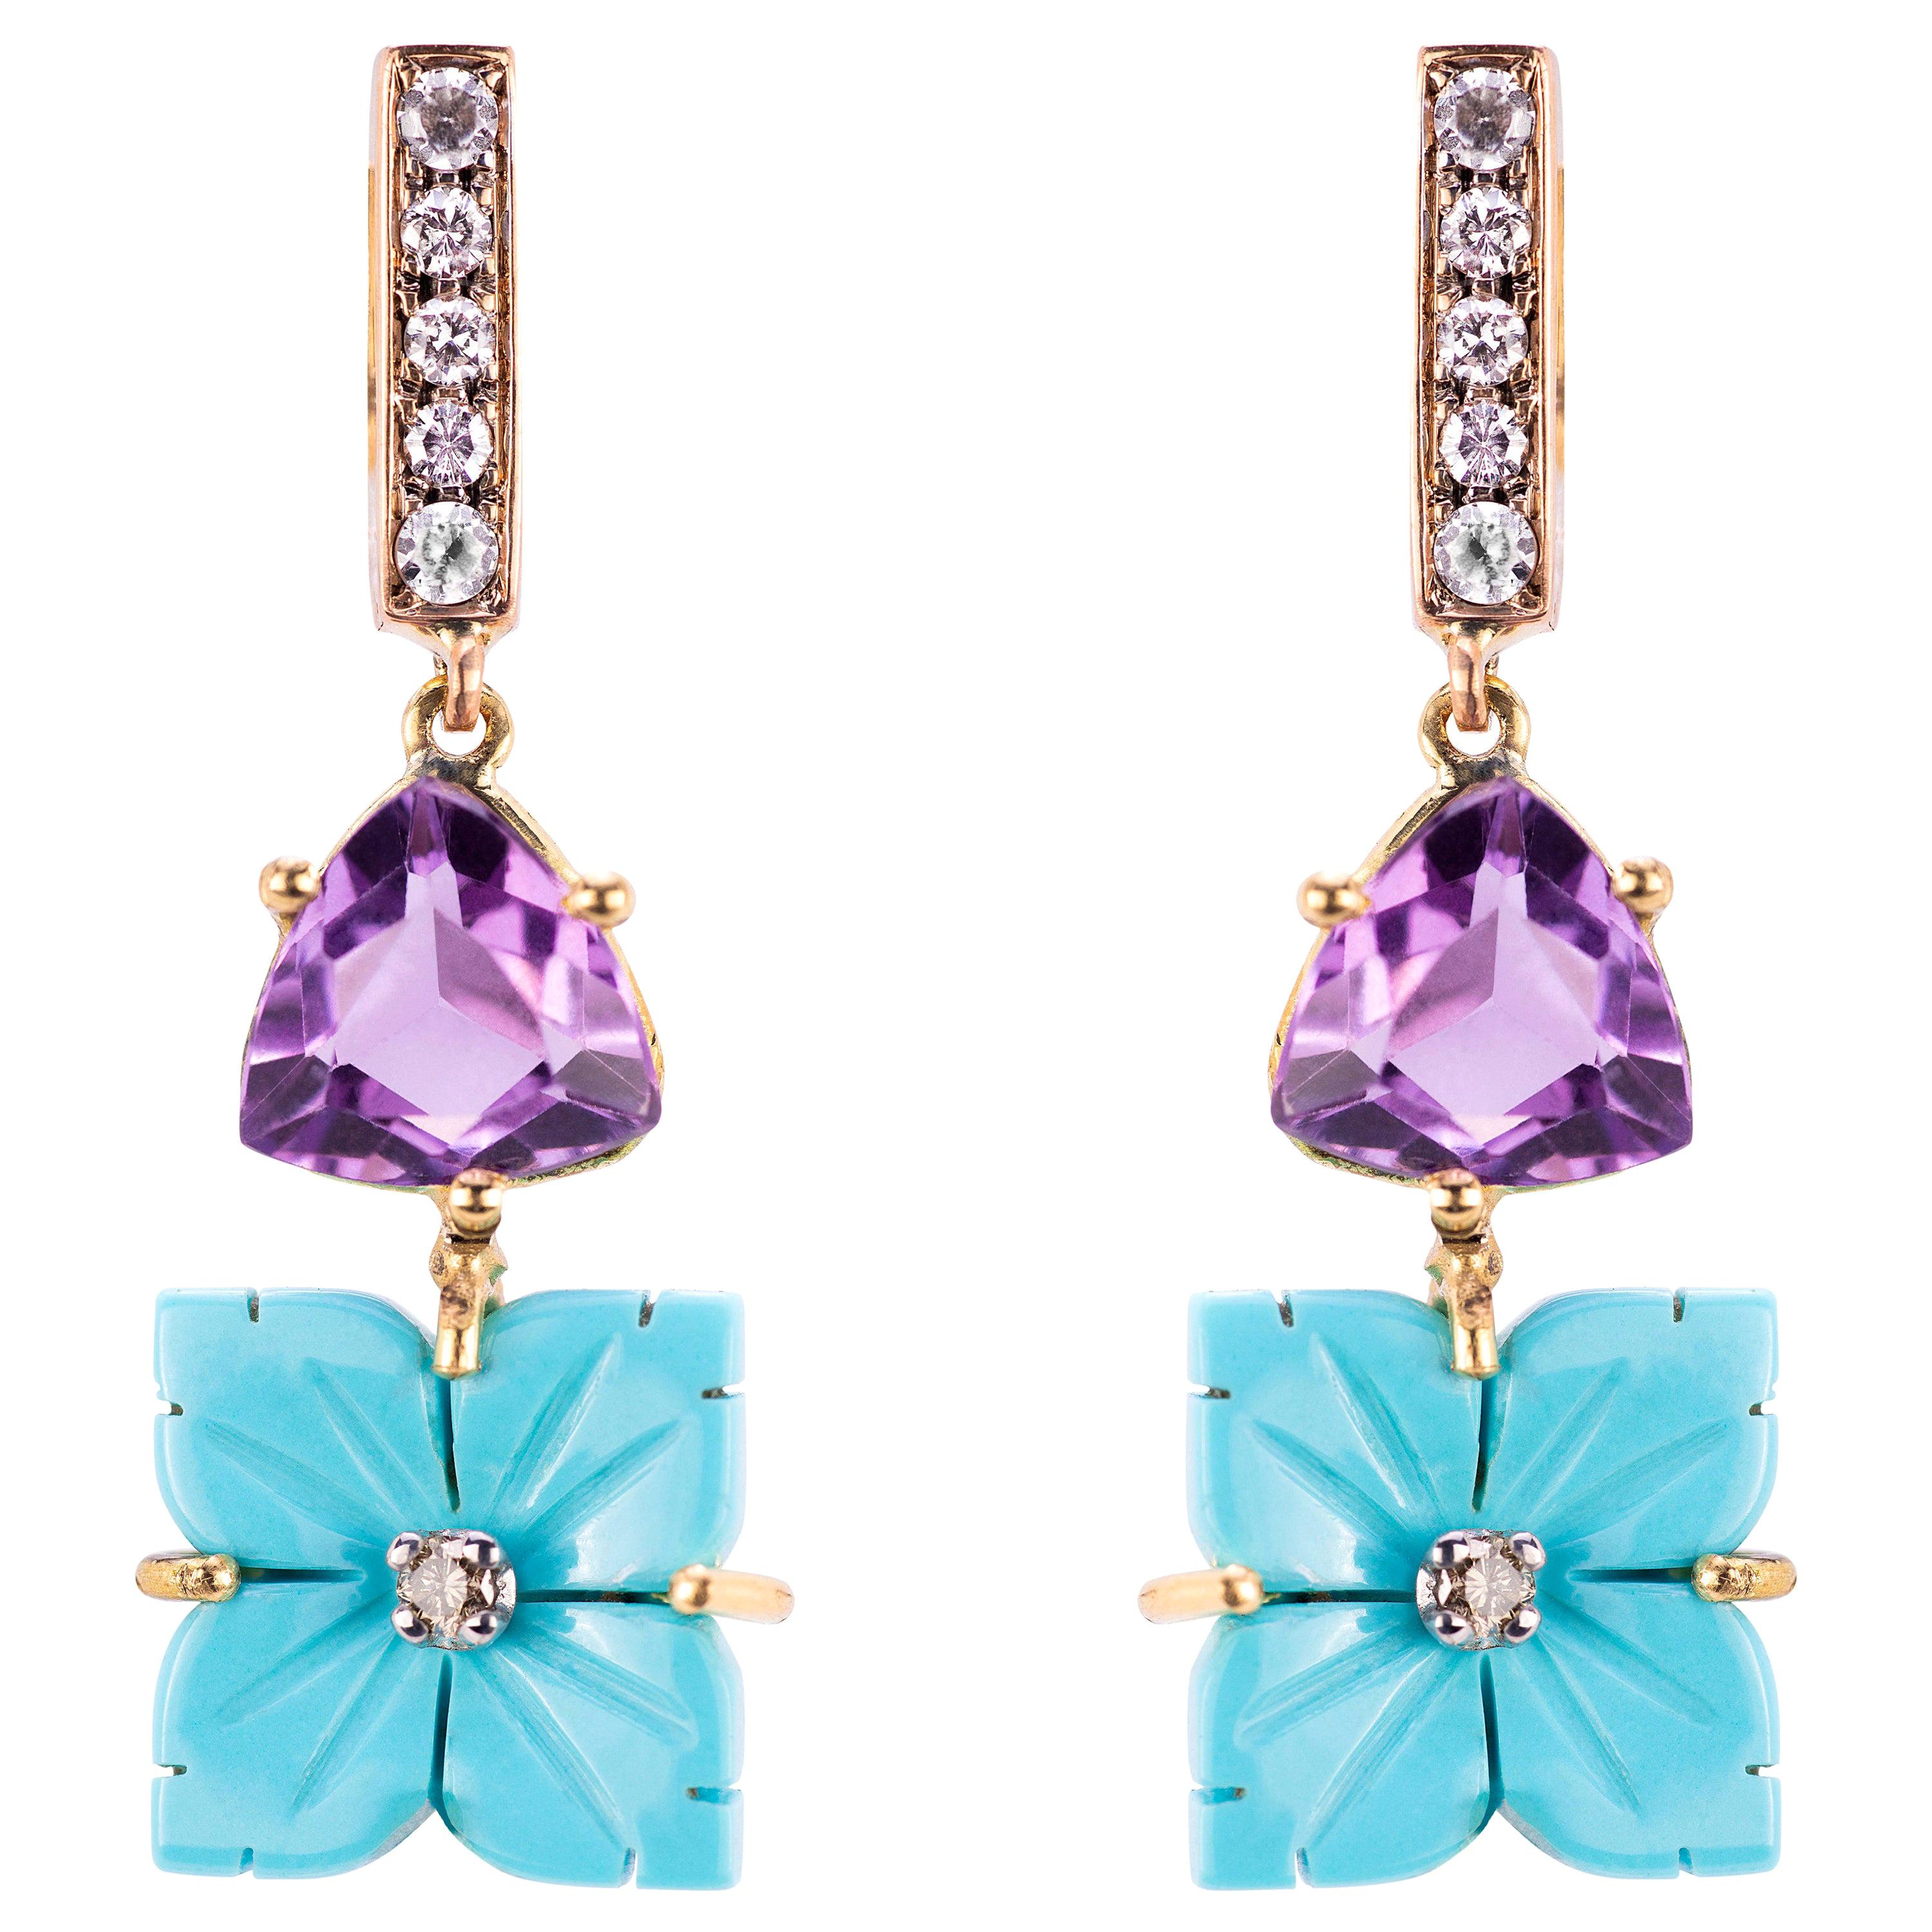 Rossella Ugolini 18K Gold Amethyst and Turquoise Floral Earrings In New Condition For Sale In Rome, IT